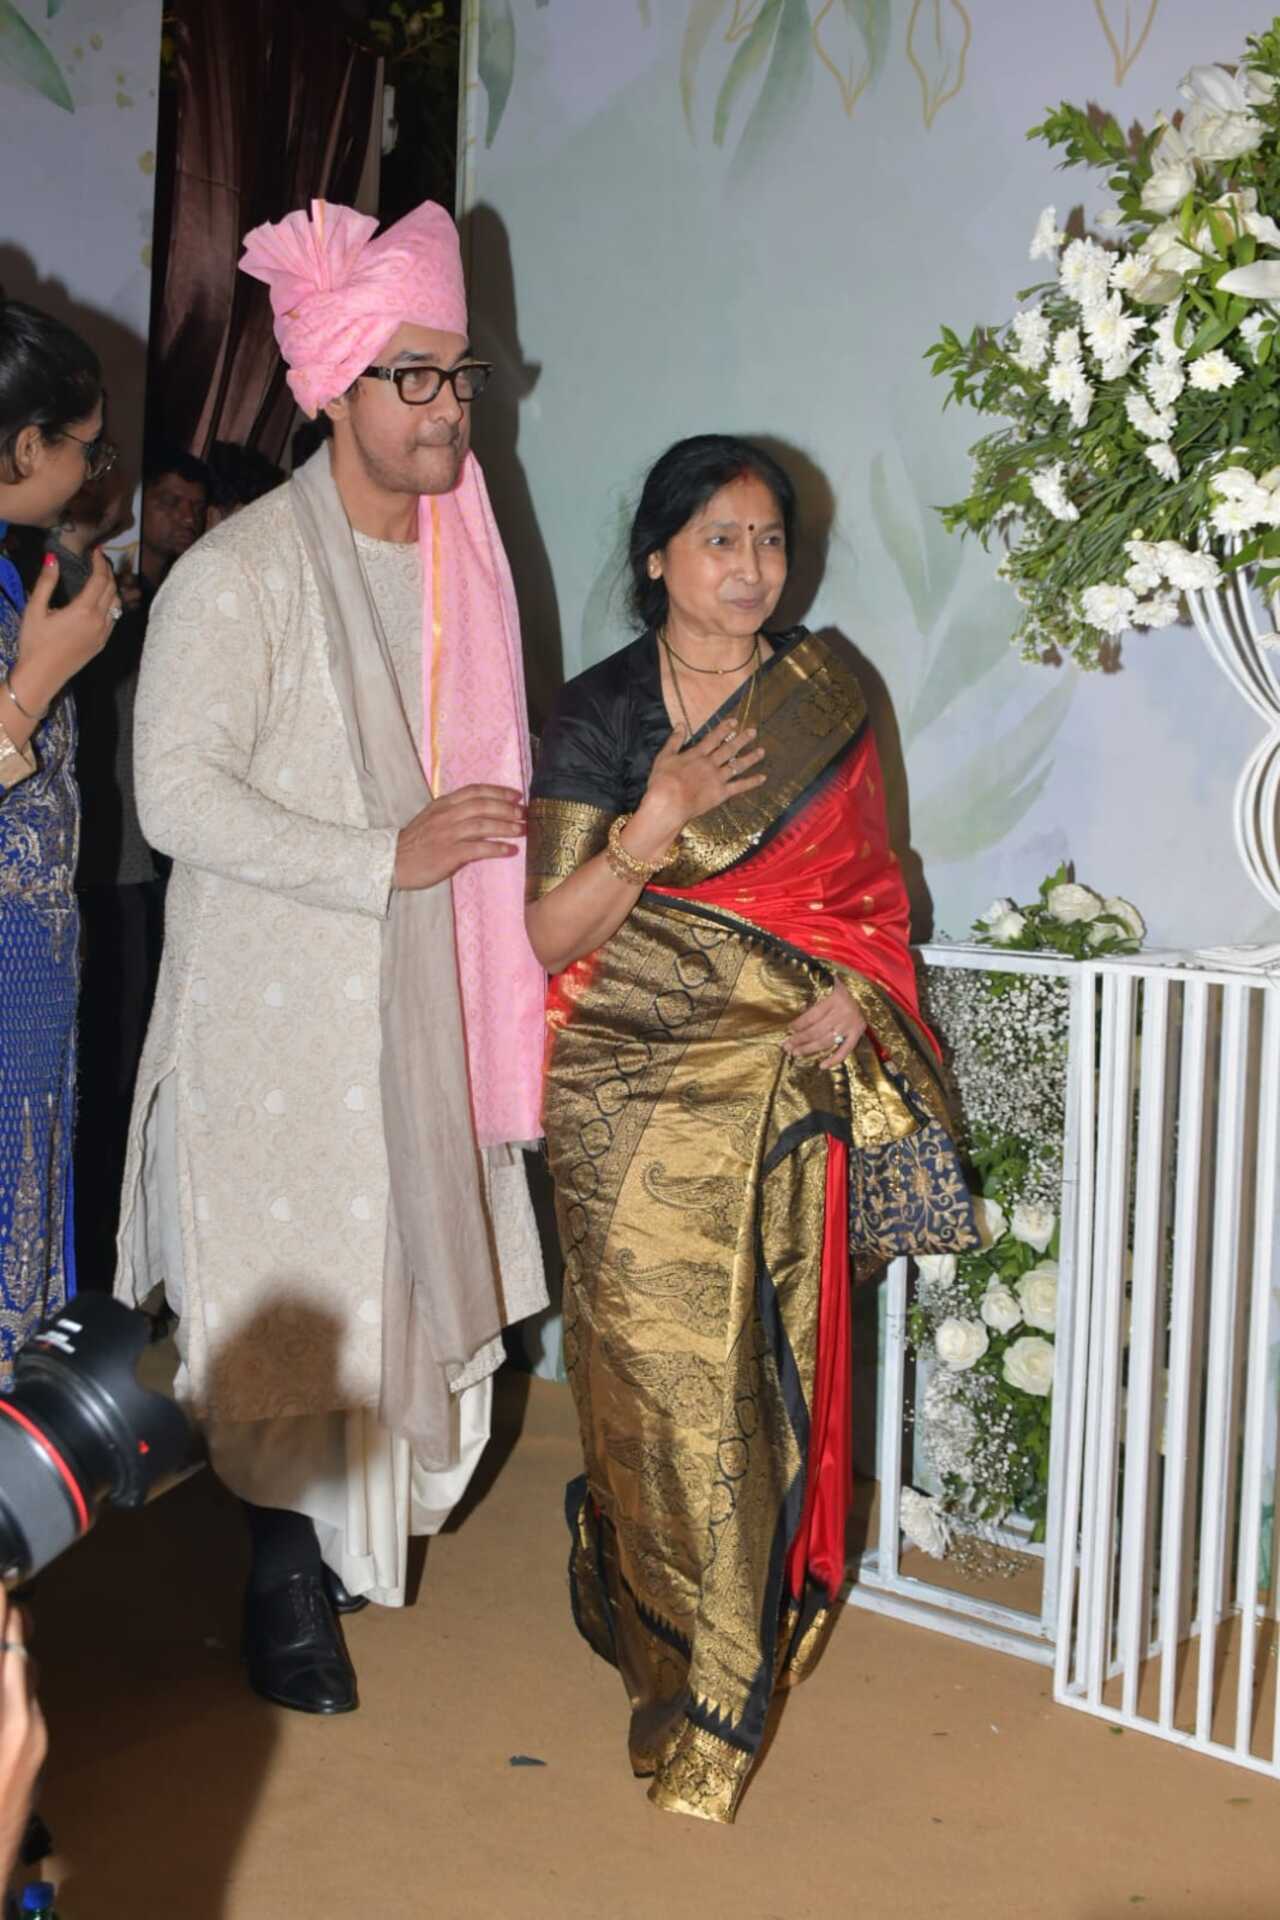 Aamir Khan steps out with Ira's mother-in-law as they head out to greet paps stationed outside the venue. Nupur's mother was dressed in a red saree for the wedding and was seen dancing enthusiastically as his son headed the baraat